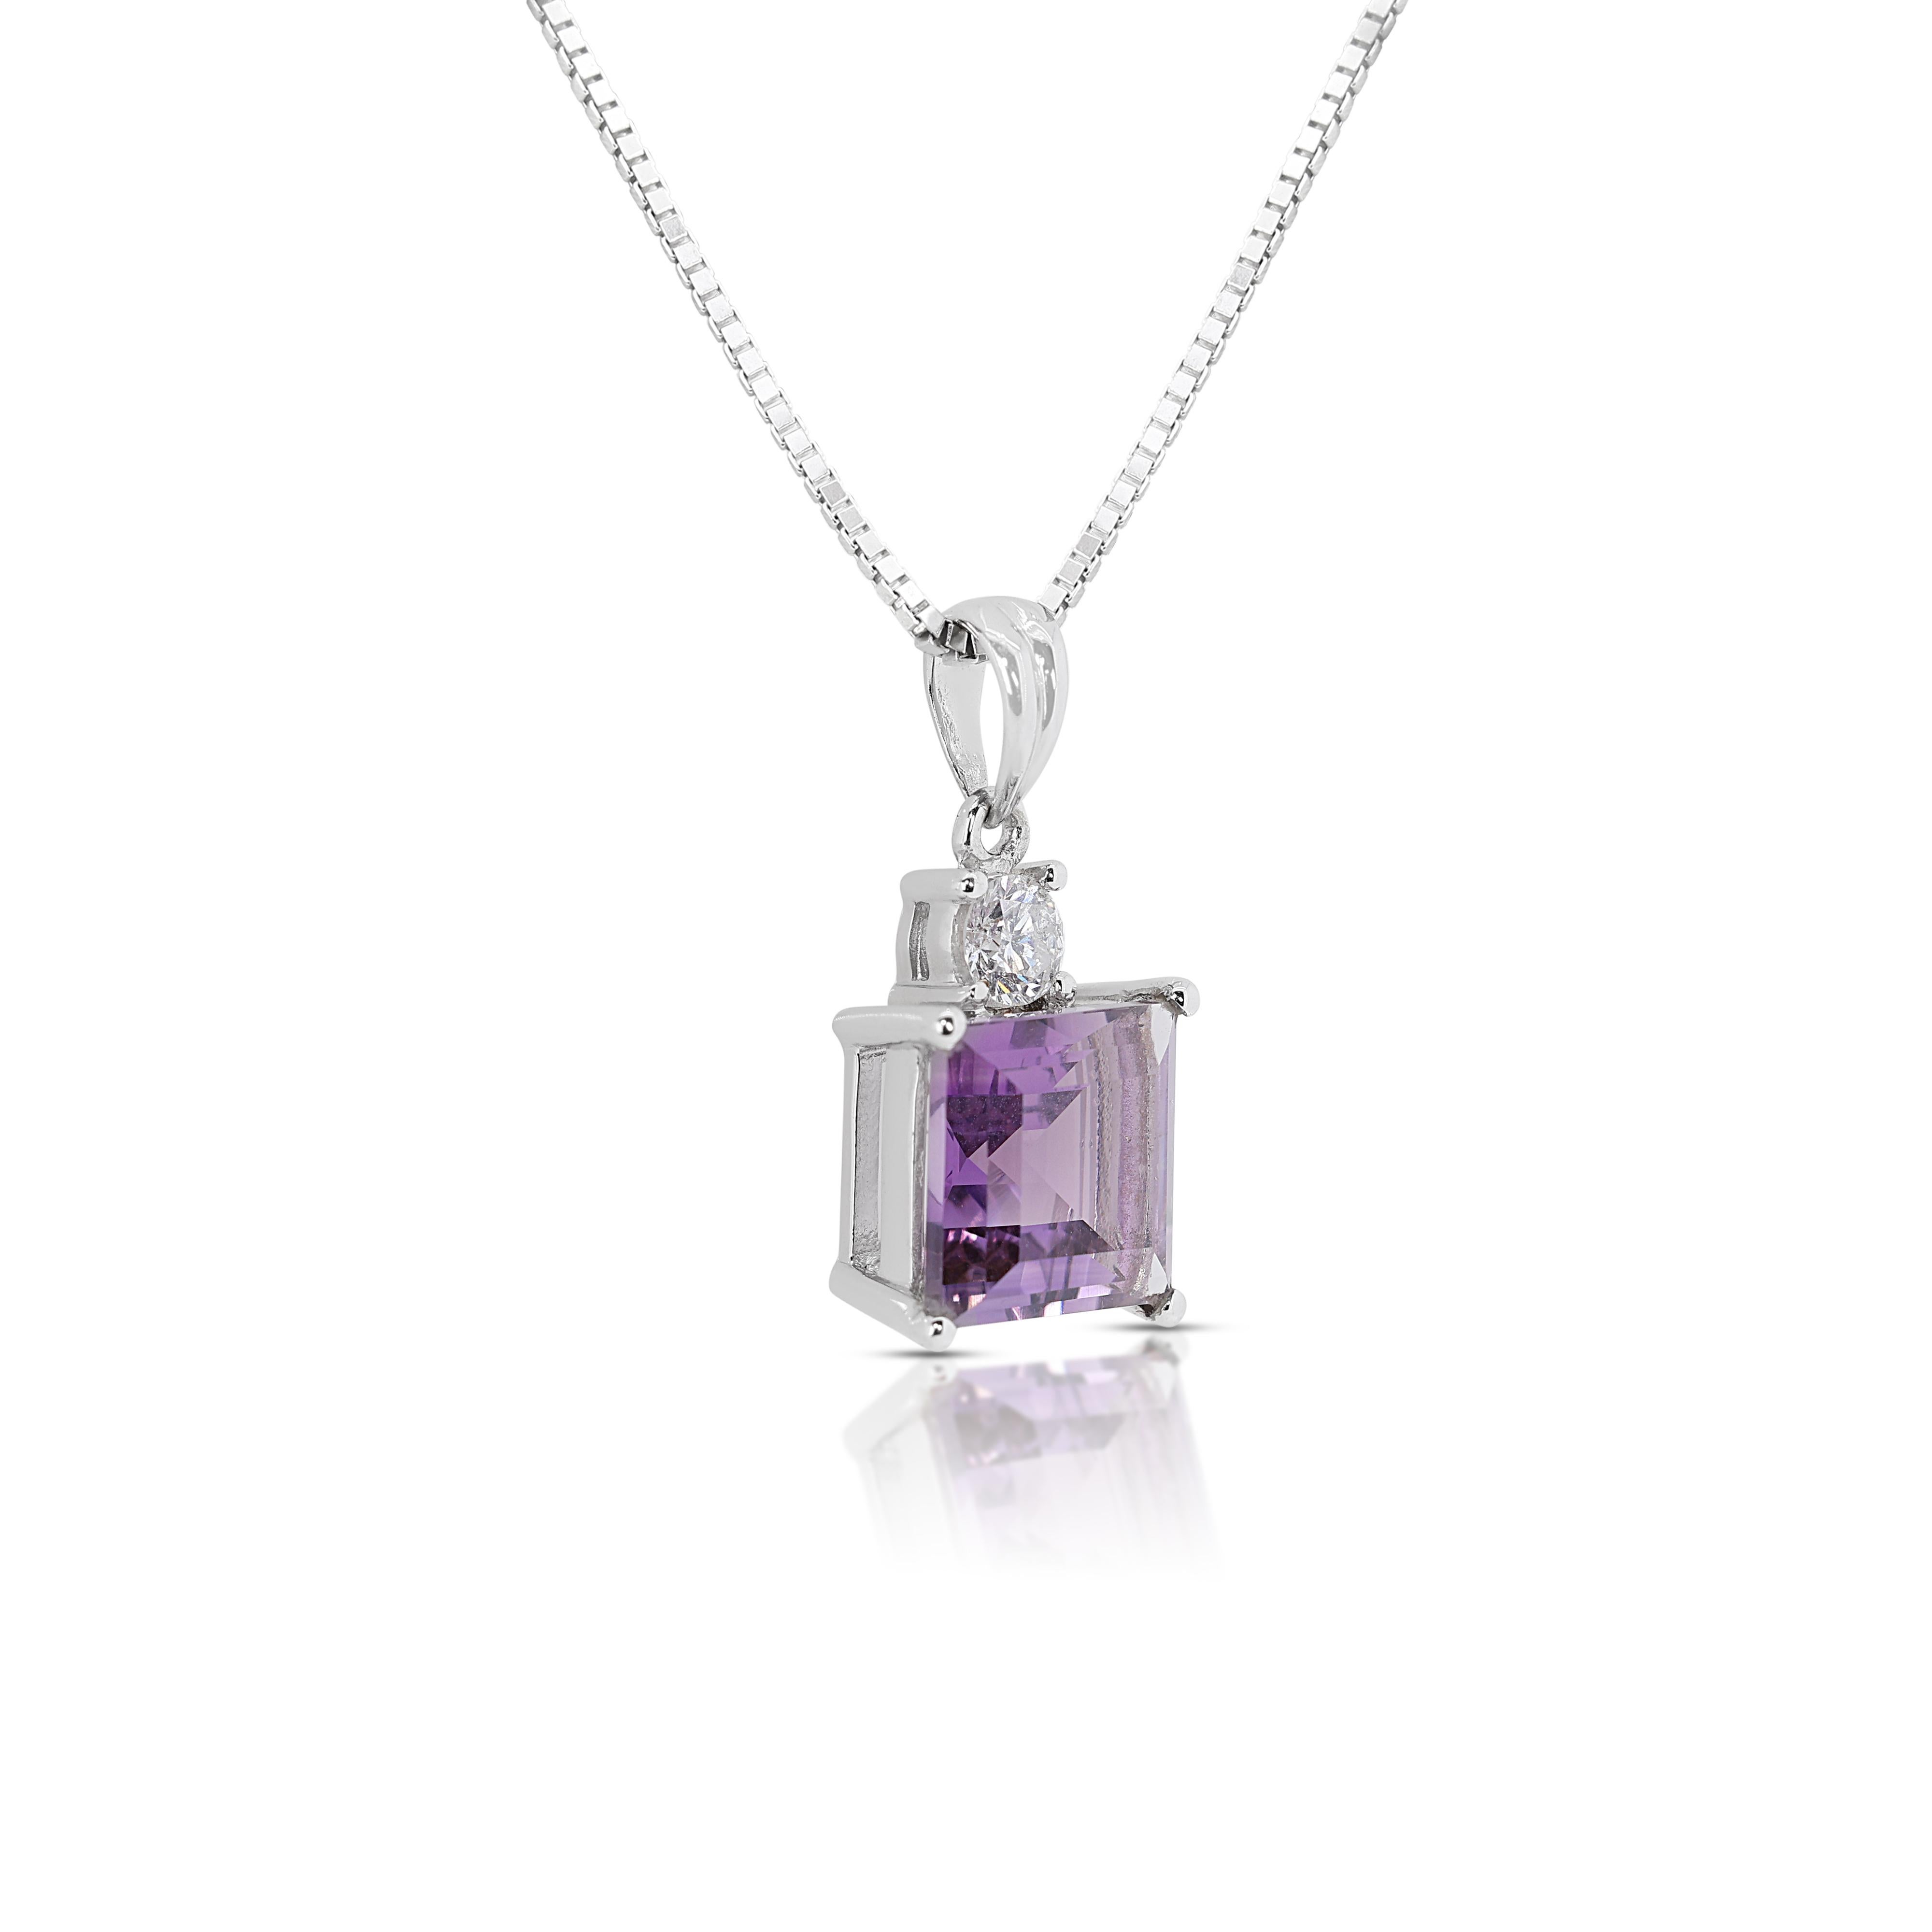 Elegant 1.94ct Amethyst Pendant w/ Diamonds in 18K White Gold-Chain Not Included In Excellent Condition For Sale In רמת גן, IL